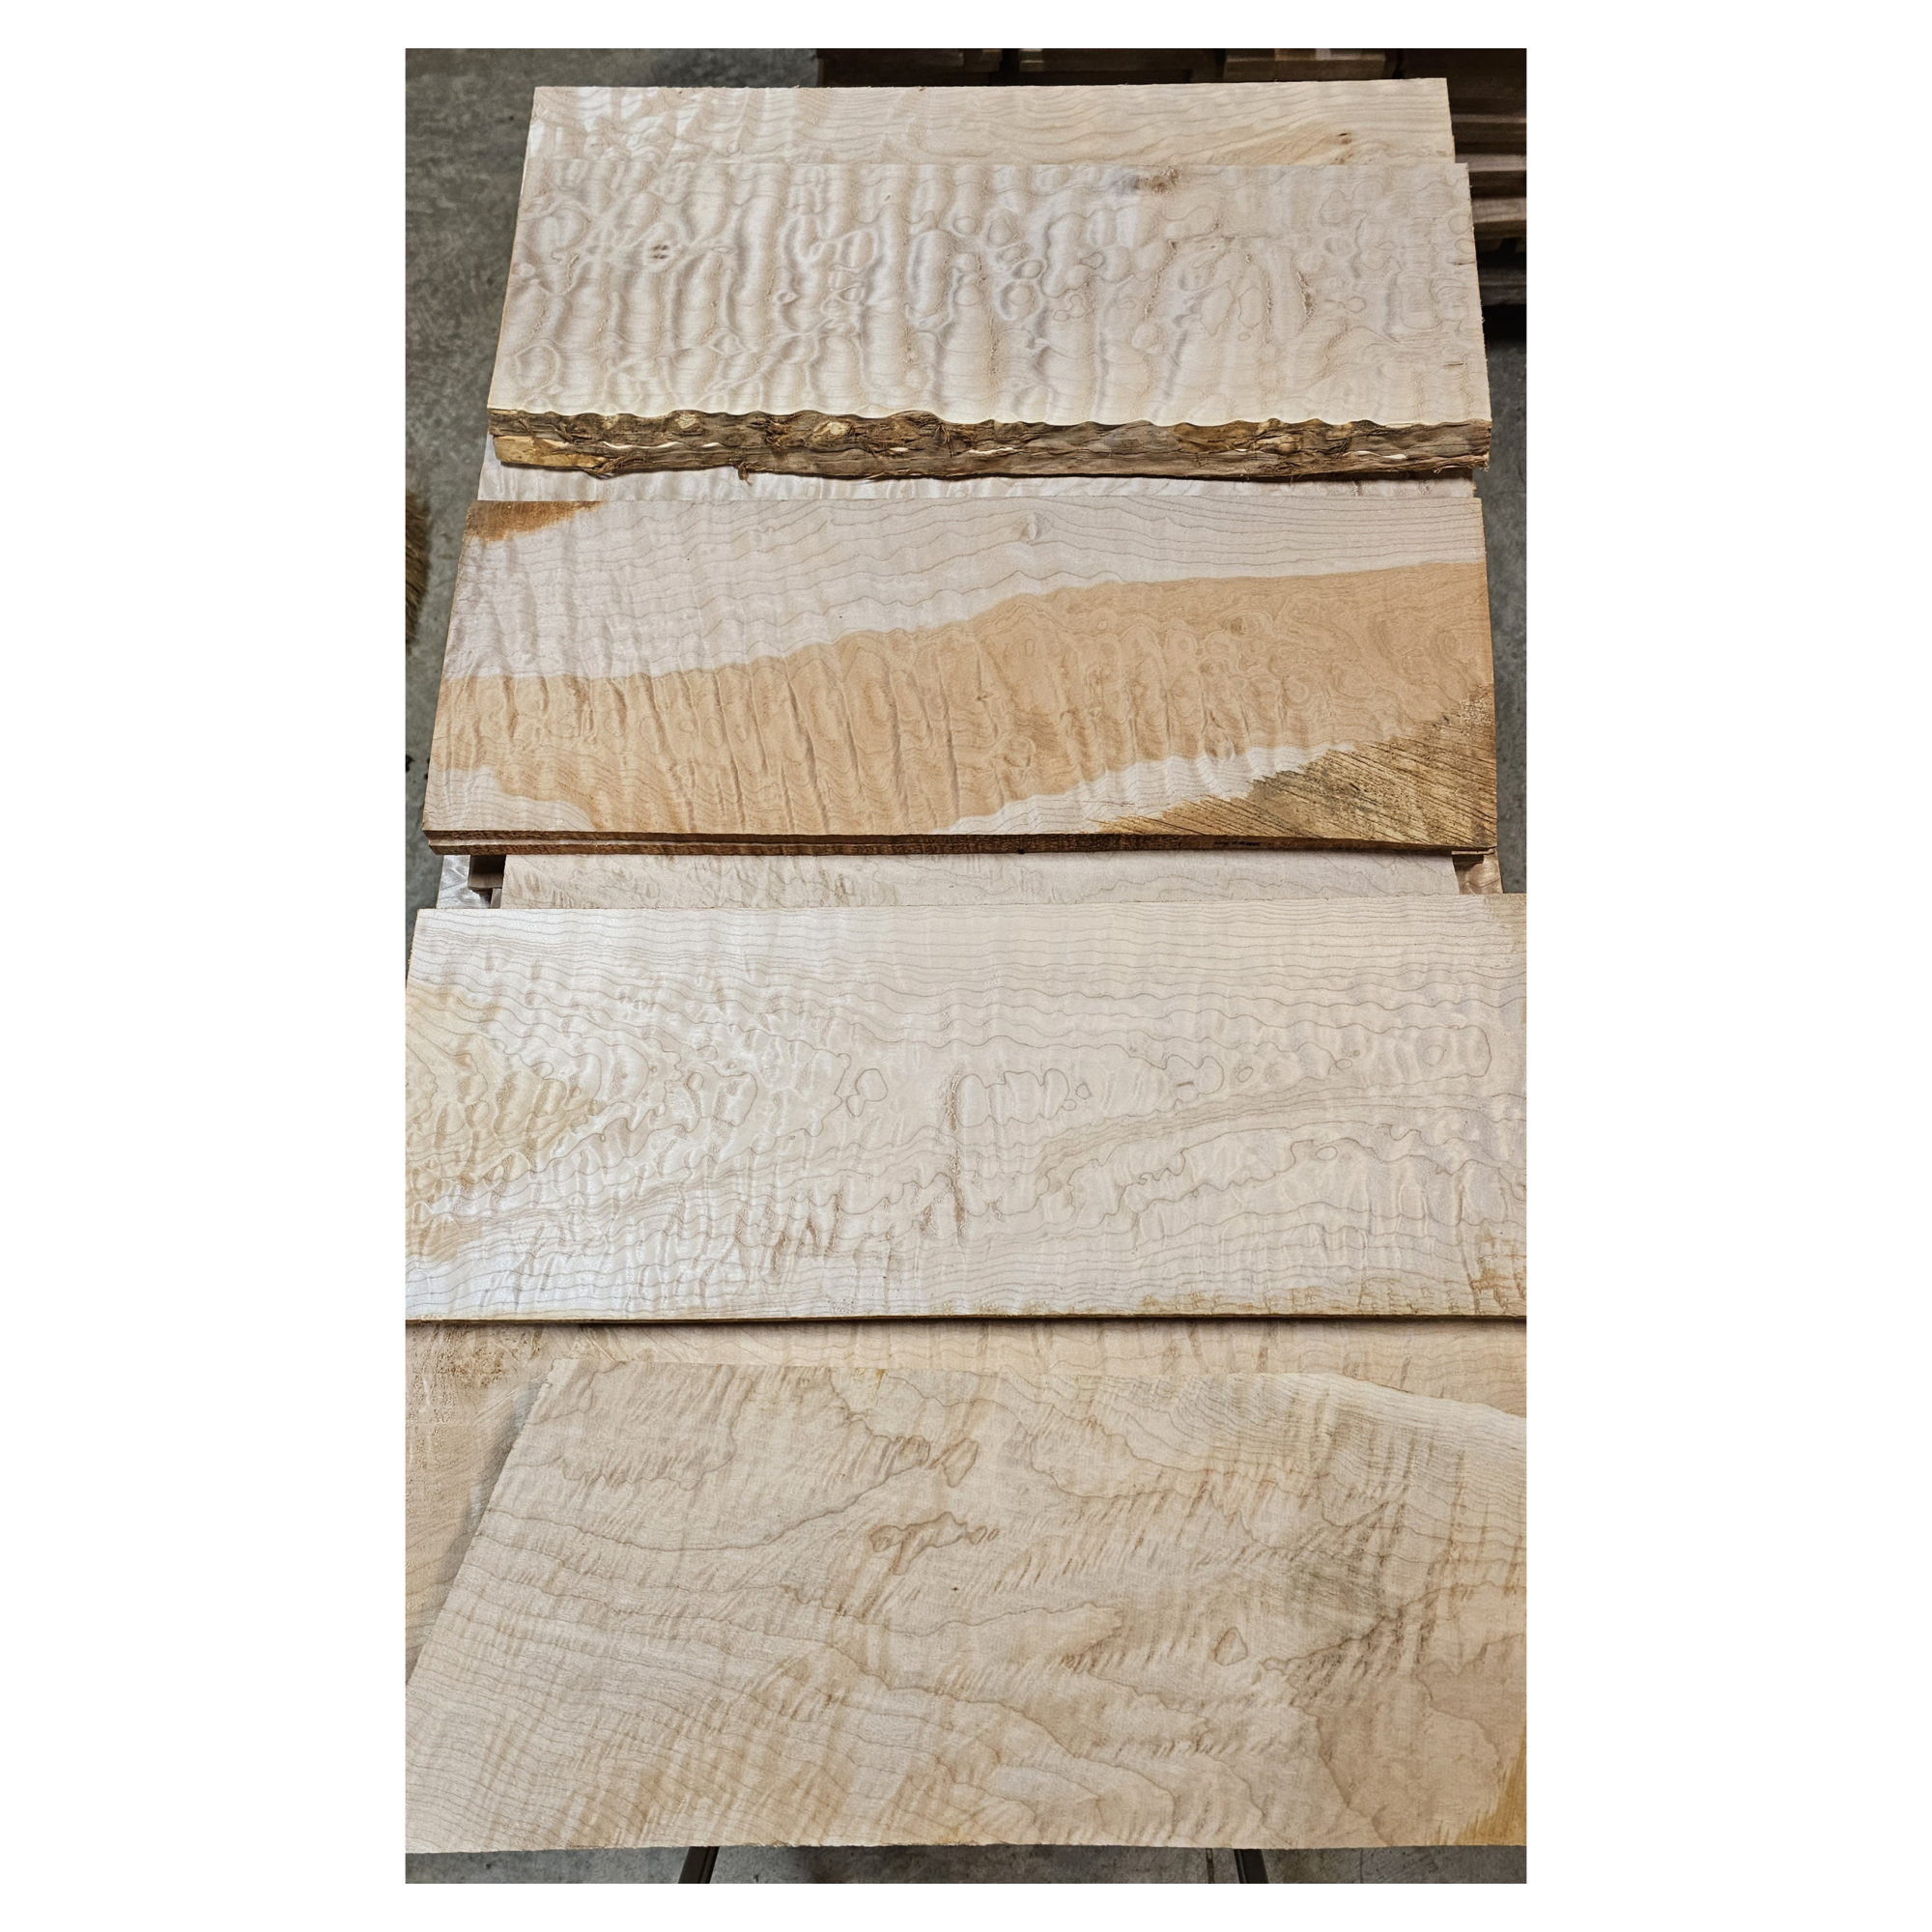 Selection of quilted maple sets with varying color and figure grade